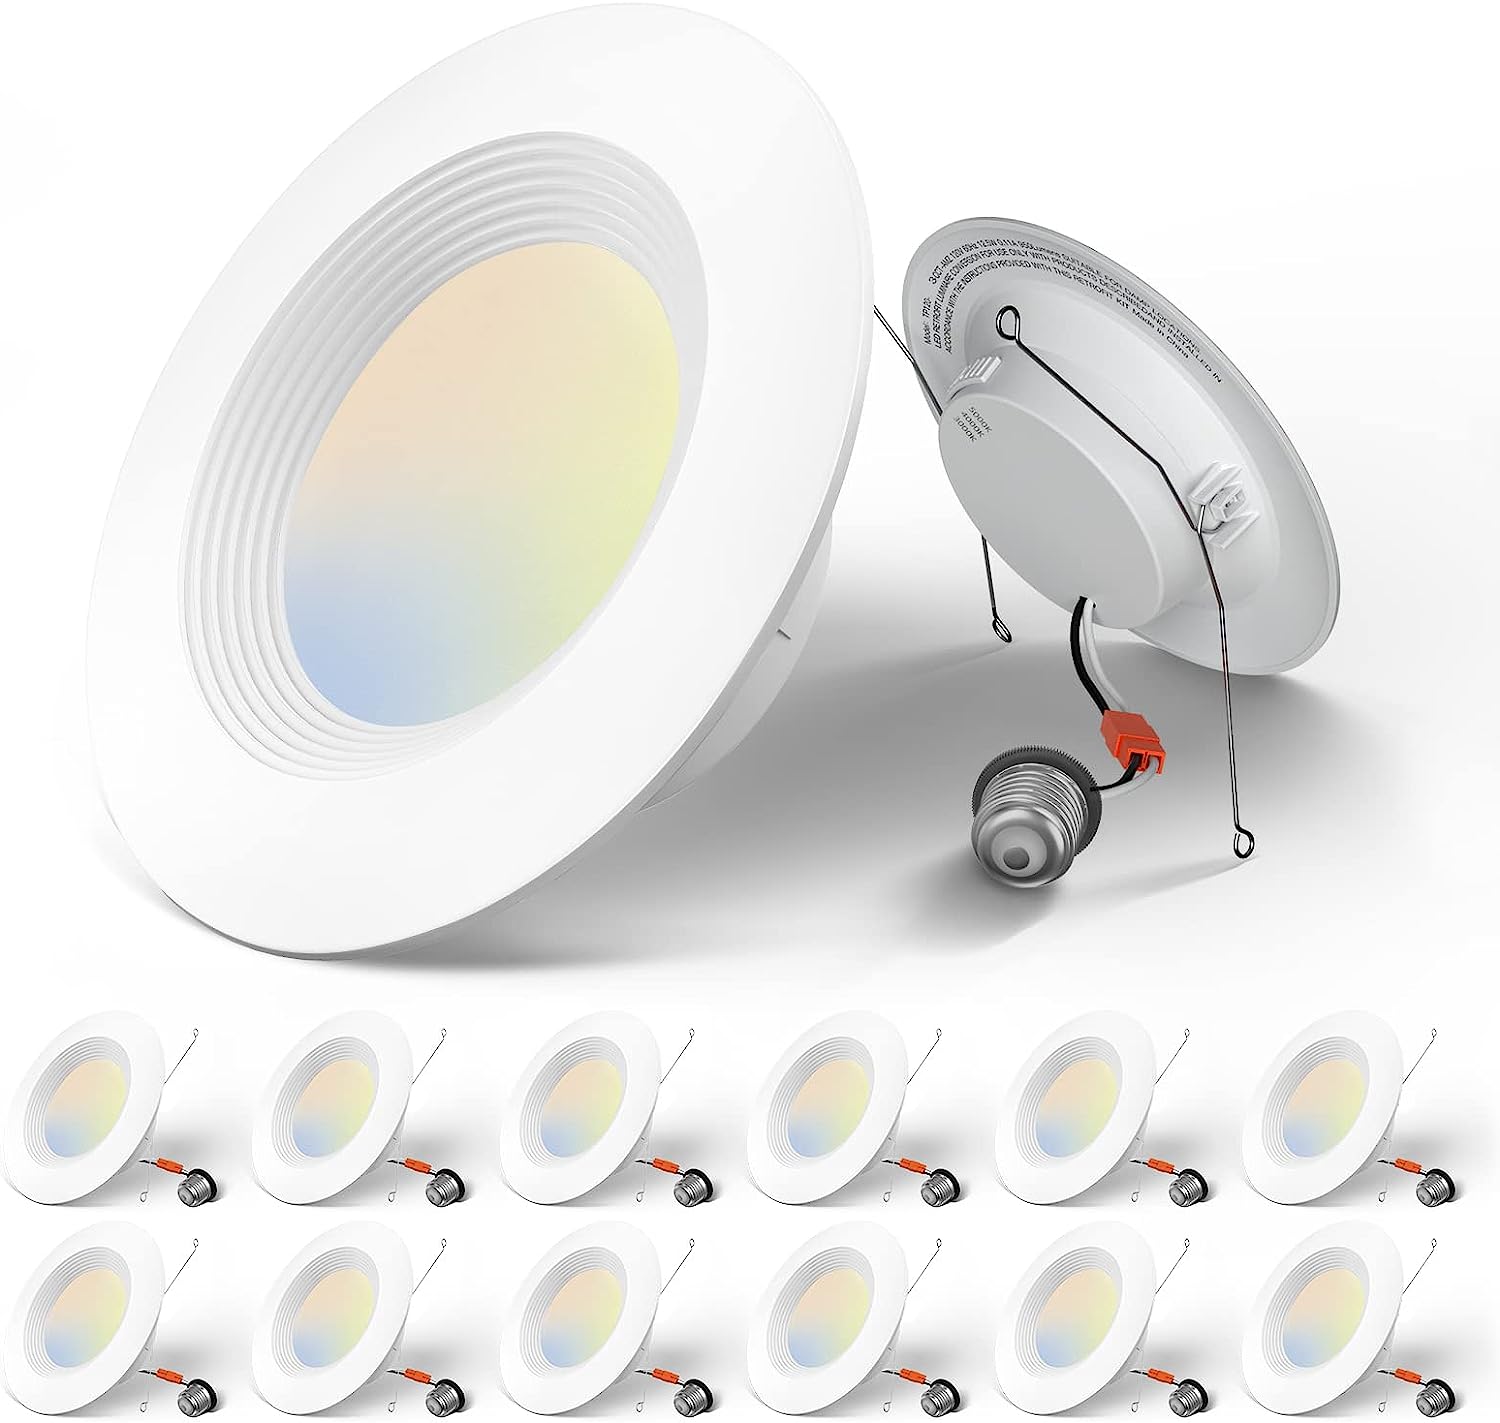 Amico 5/6 inch 3CCT LED Recessed Lighting 12 Pack, [...]